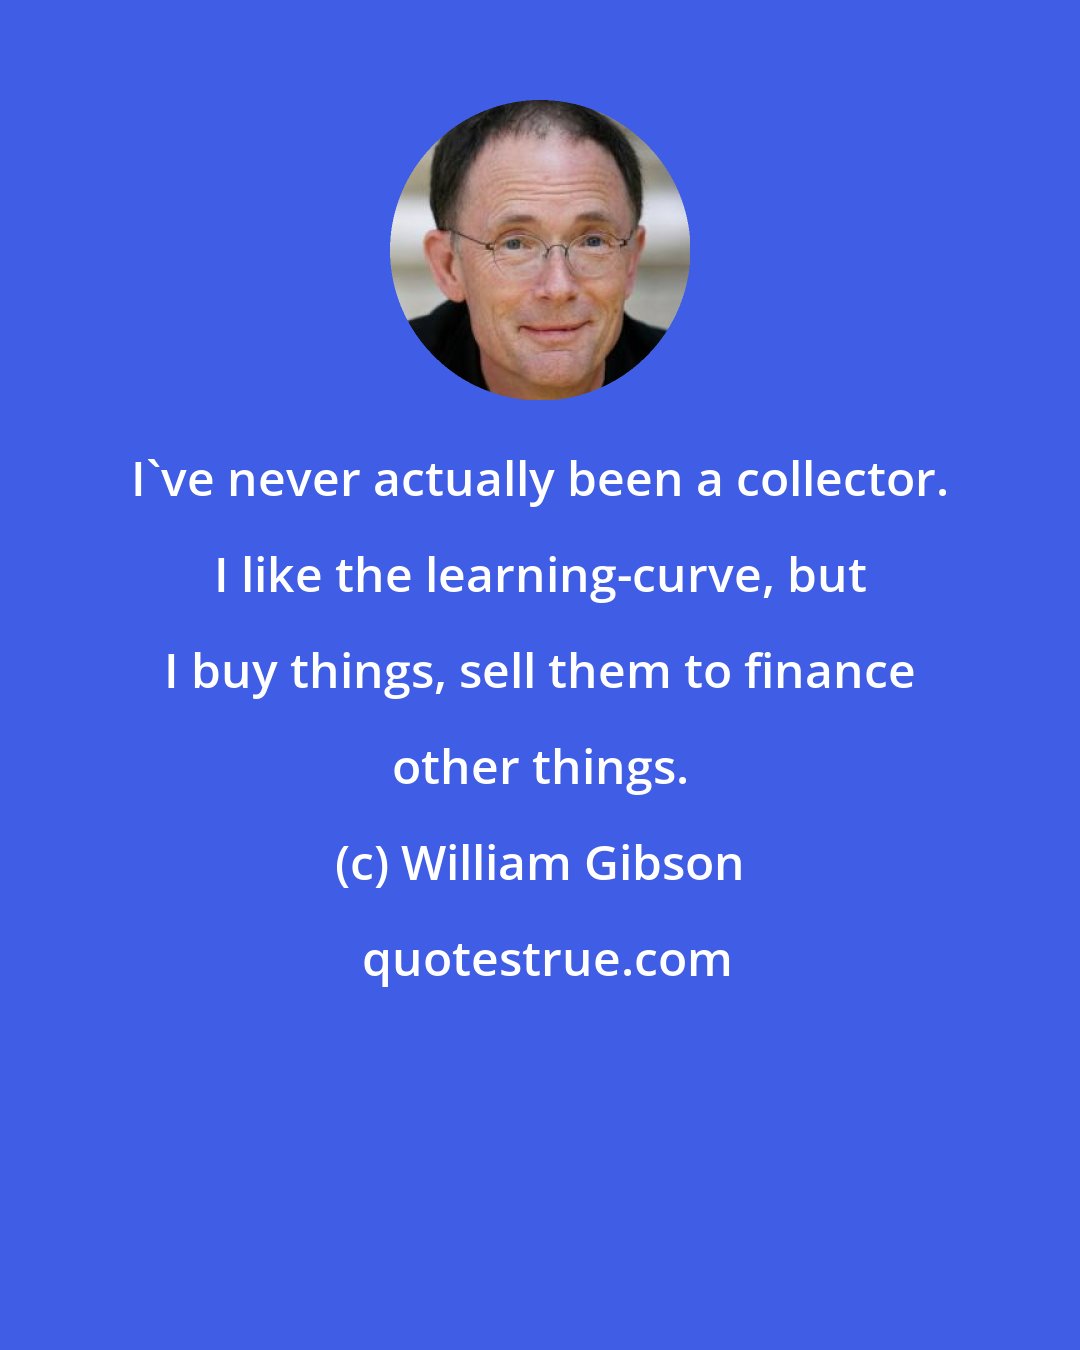 William Gibson: I've never actually been a collector. I like the learning-curve, but I buy things, sell them to finance other things.